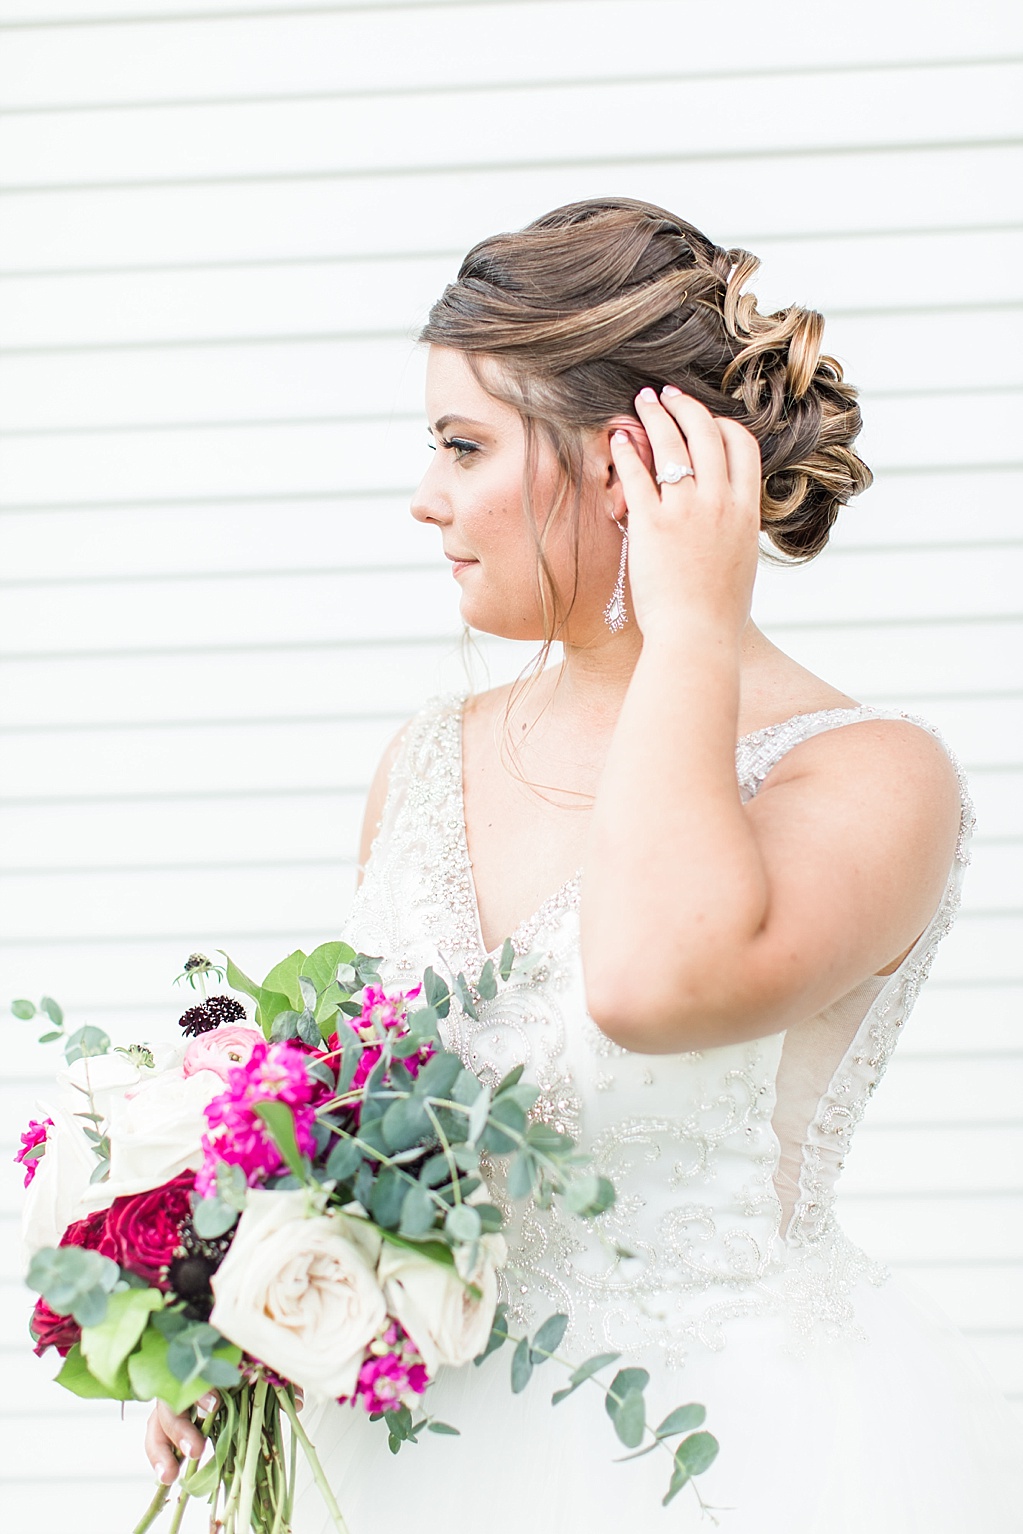 Summer Bridal Session at The Chandelier of Gruene in New Braunfels Texas 0011